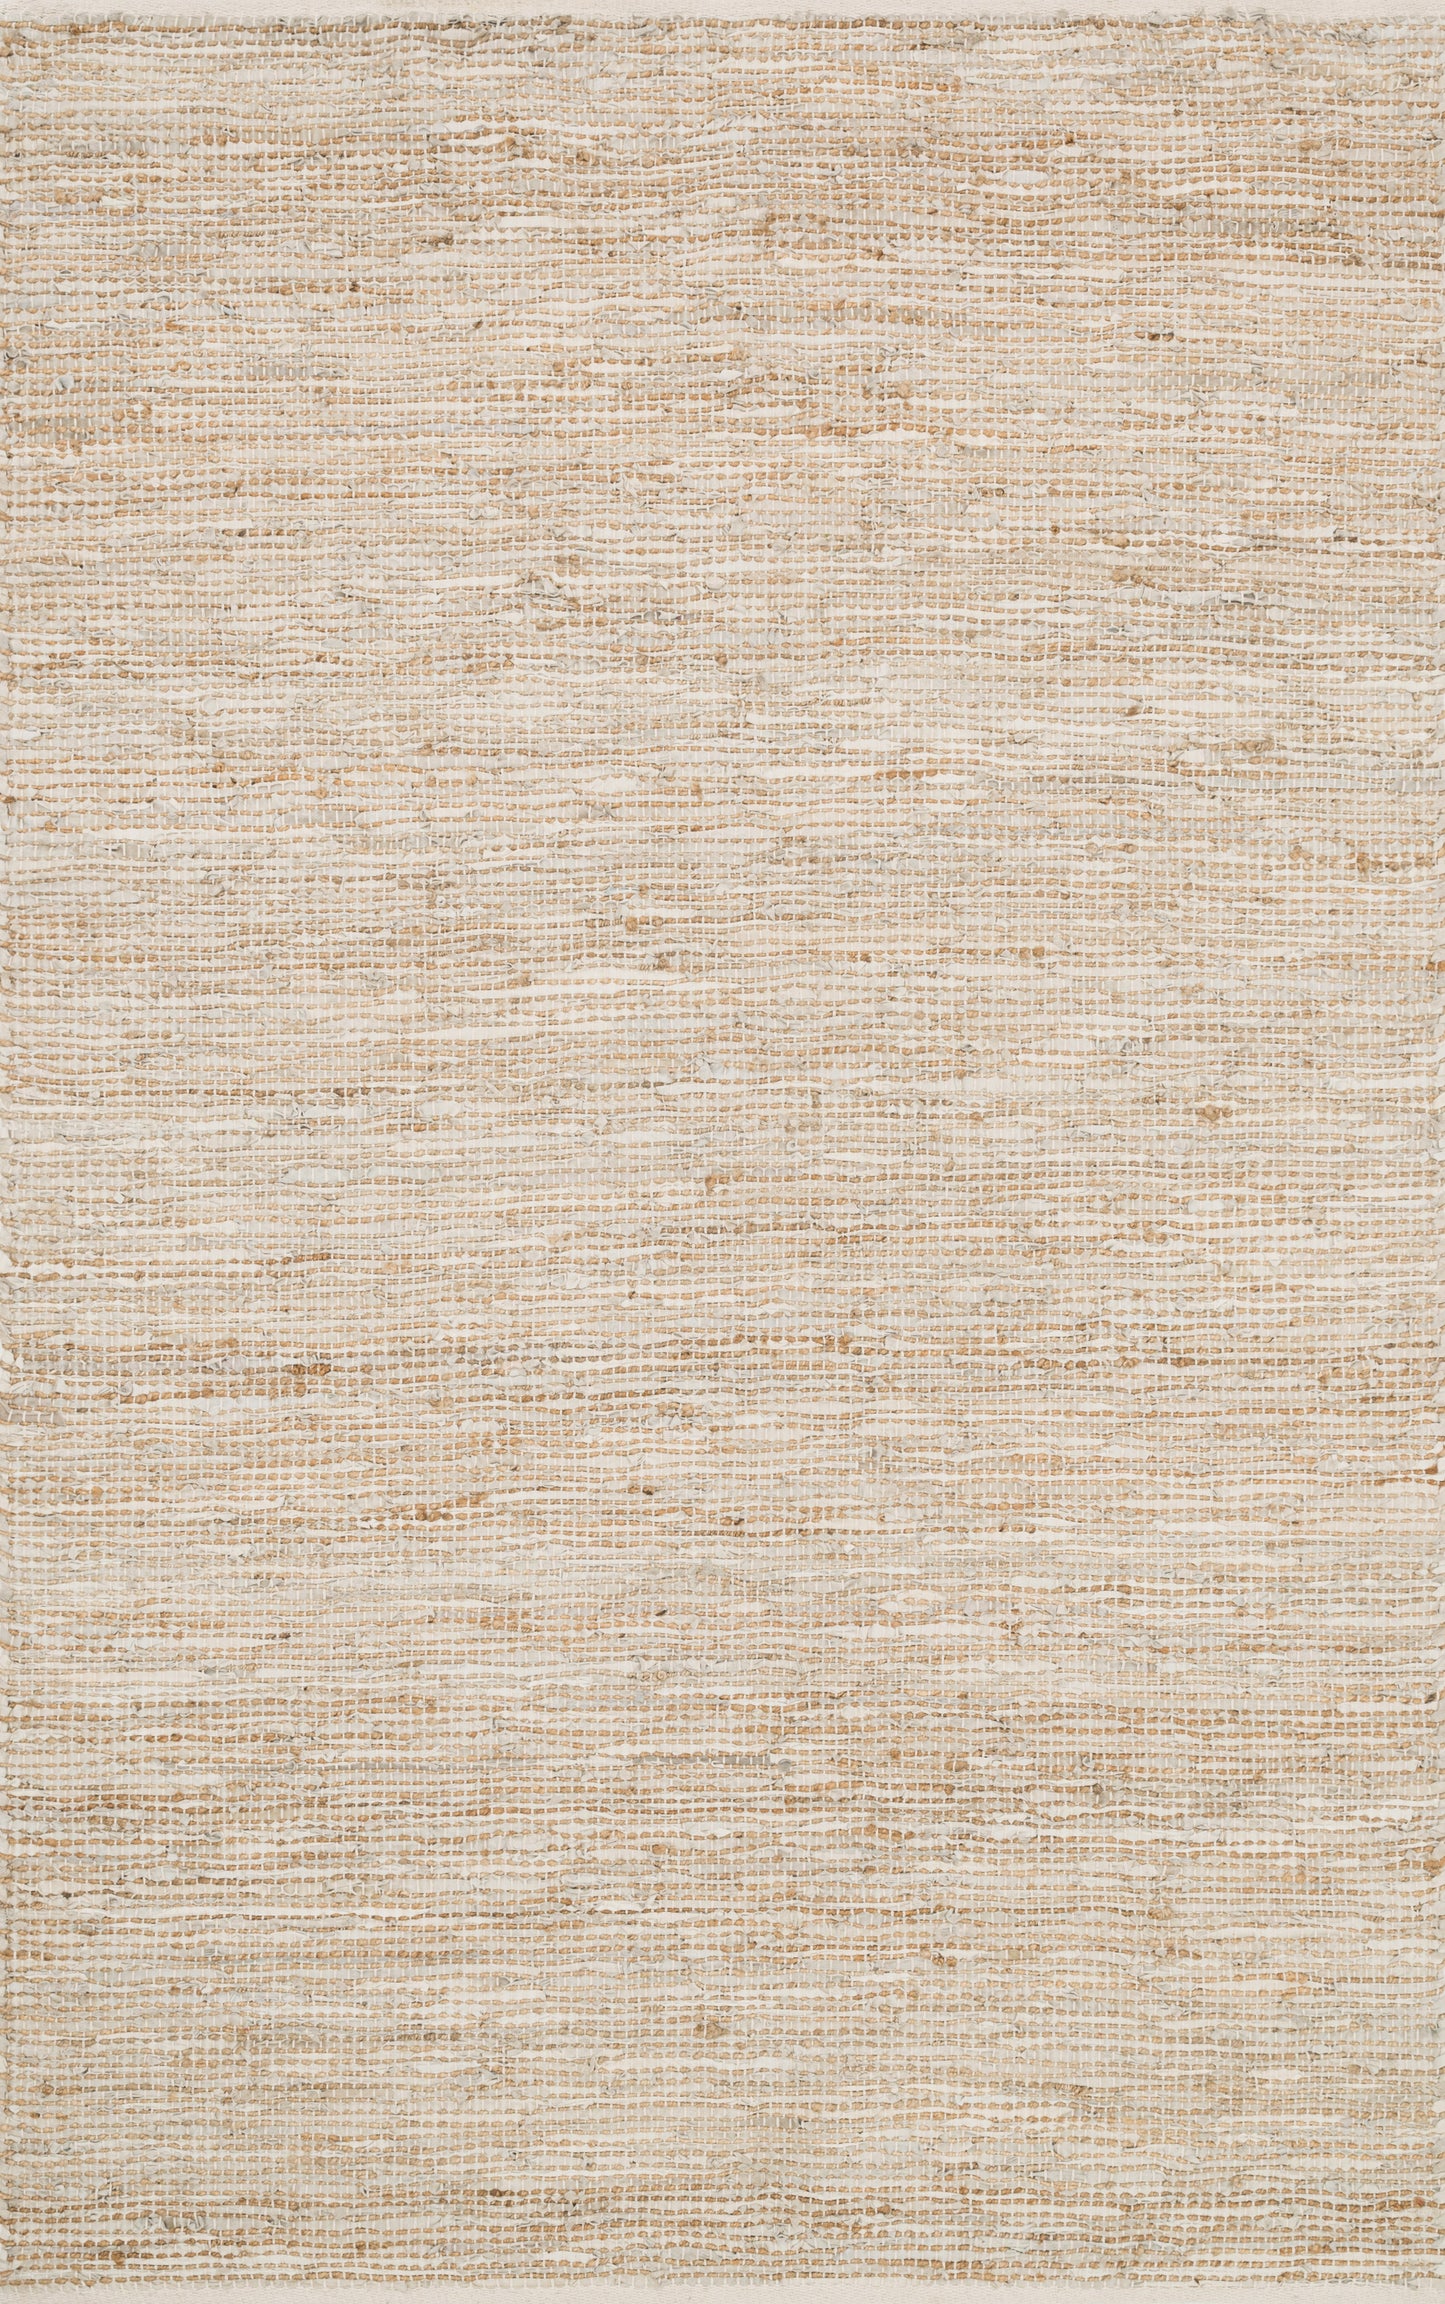 A picture of Loloi's Edge rug, in style ED-01, color Ivory